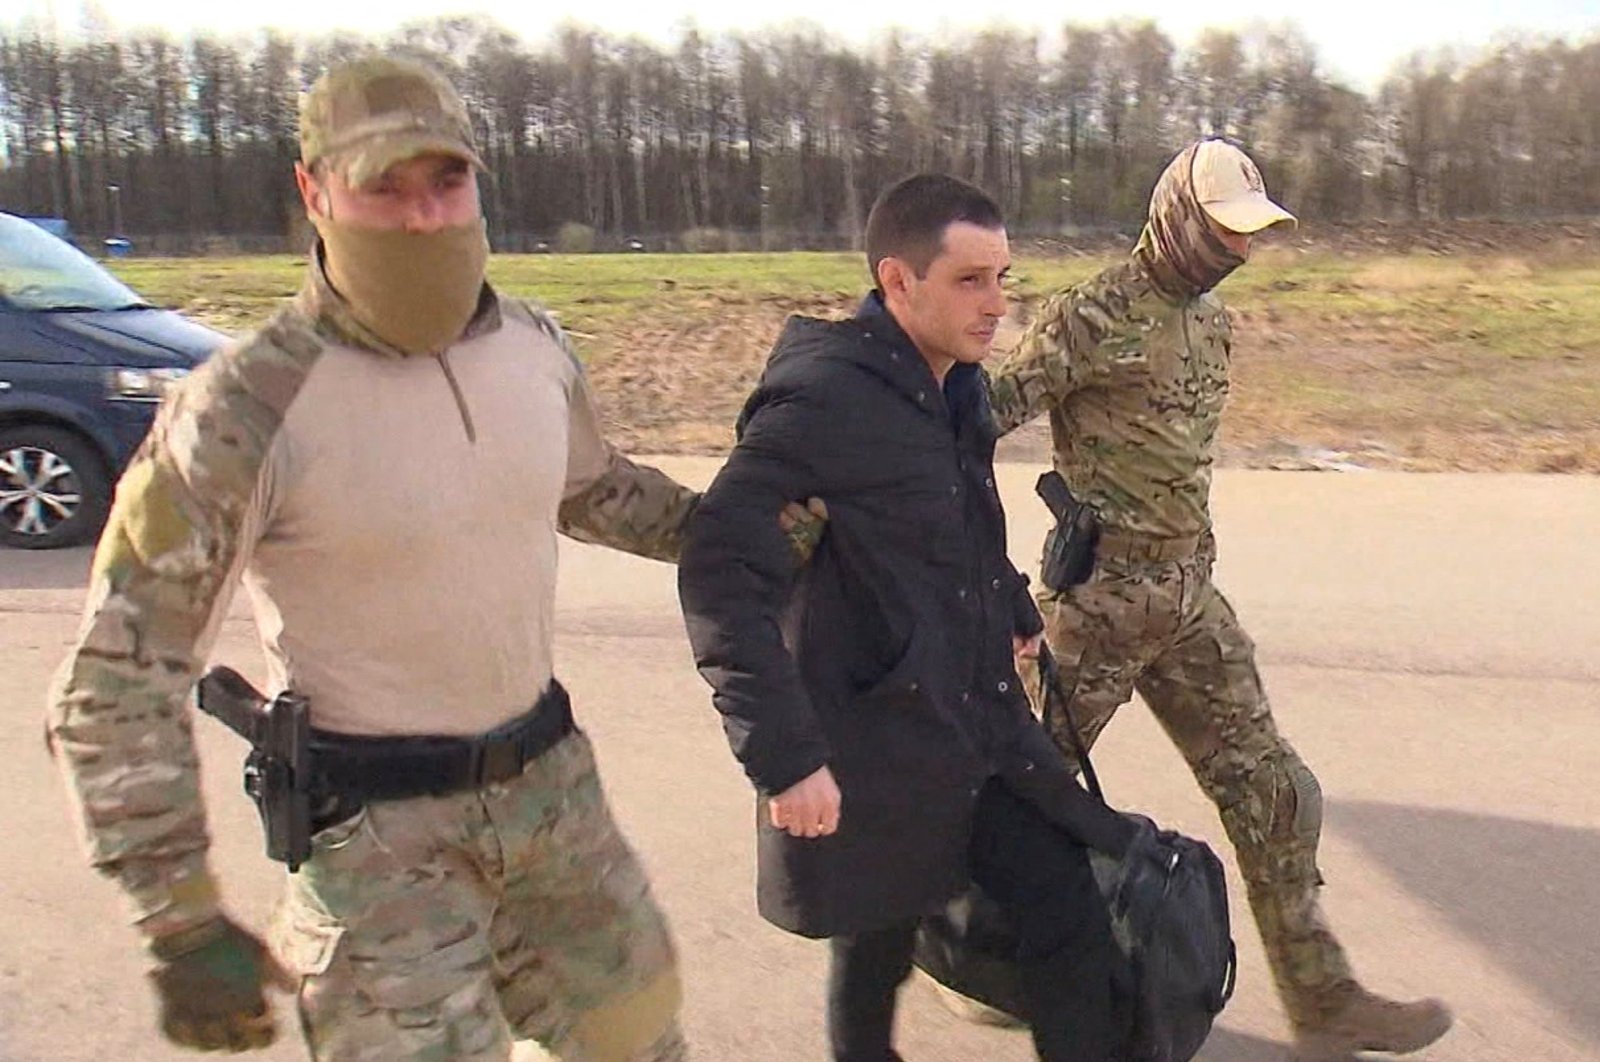 Former U.S. Marine Trevor Reed, who was detained in 2019 and accused of assaulting police officers, is escorted to a plane by Russian service members as part of a prisoner swap between the U.S. and Russia, in Moscow, Russia, April 27, 2022. (REUTERS Photo)